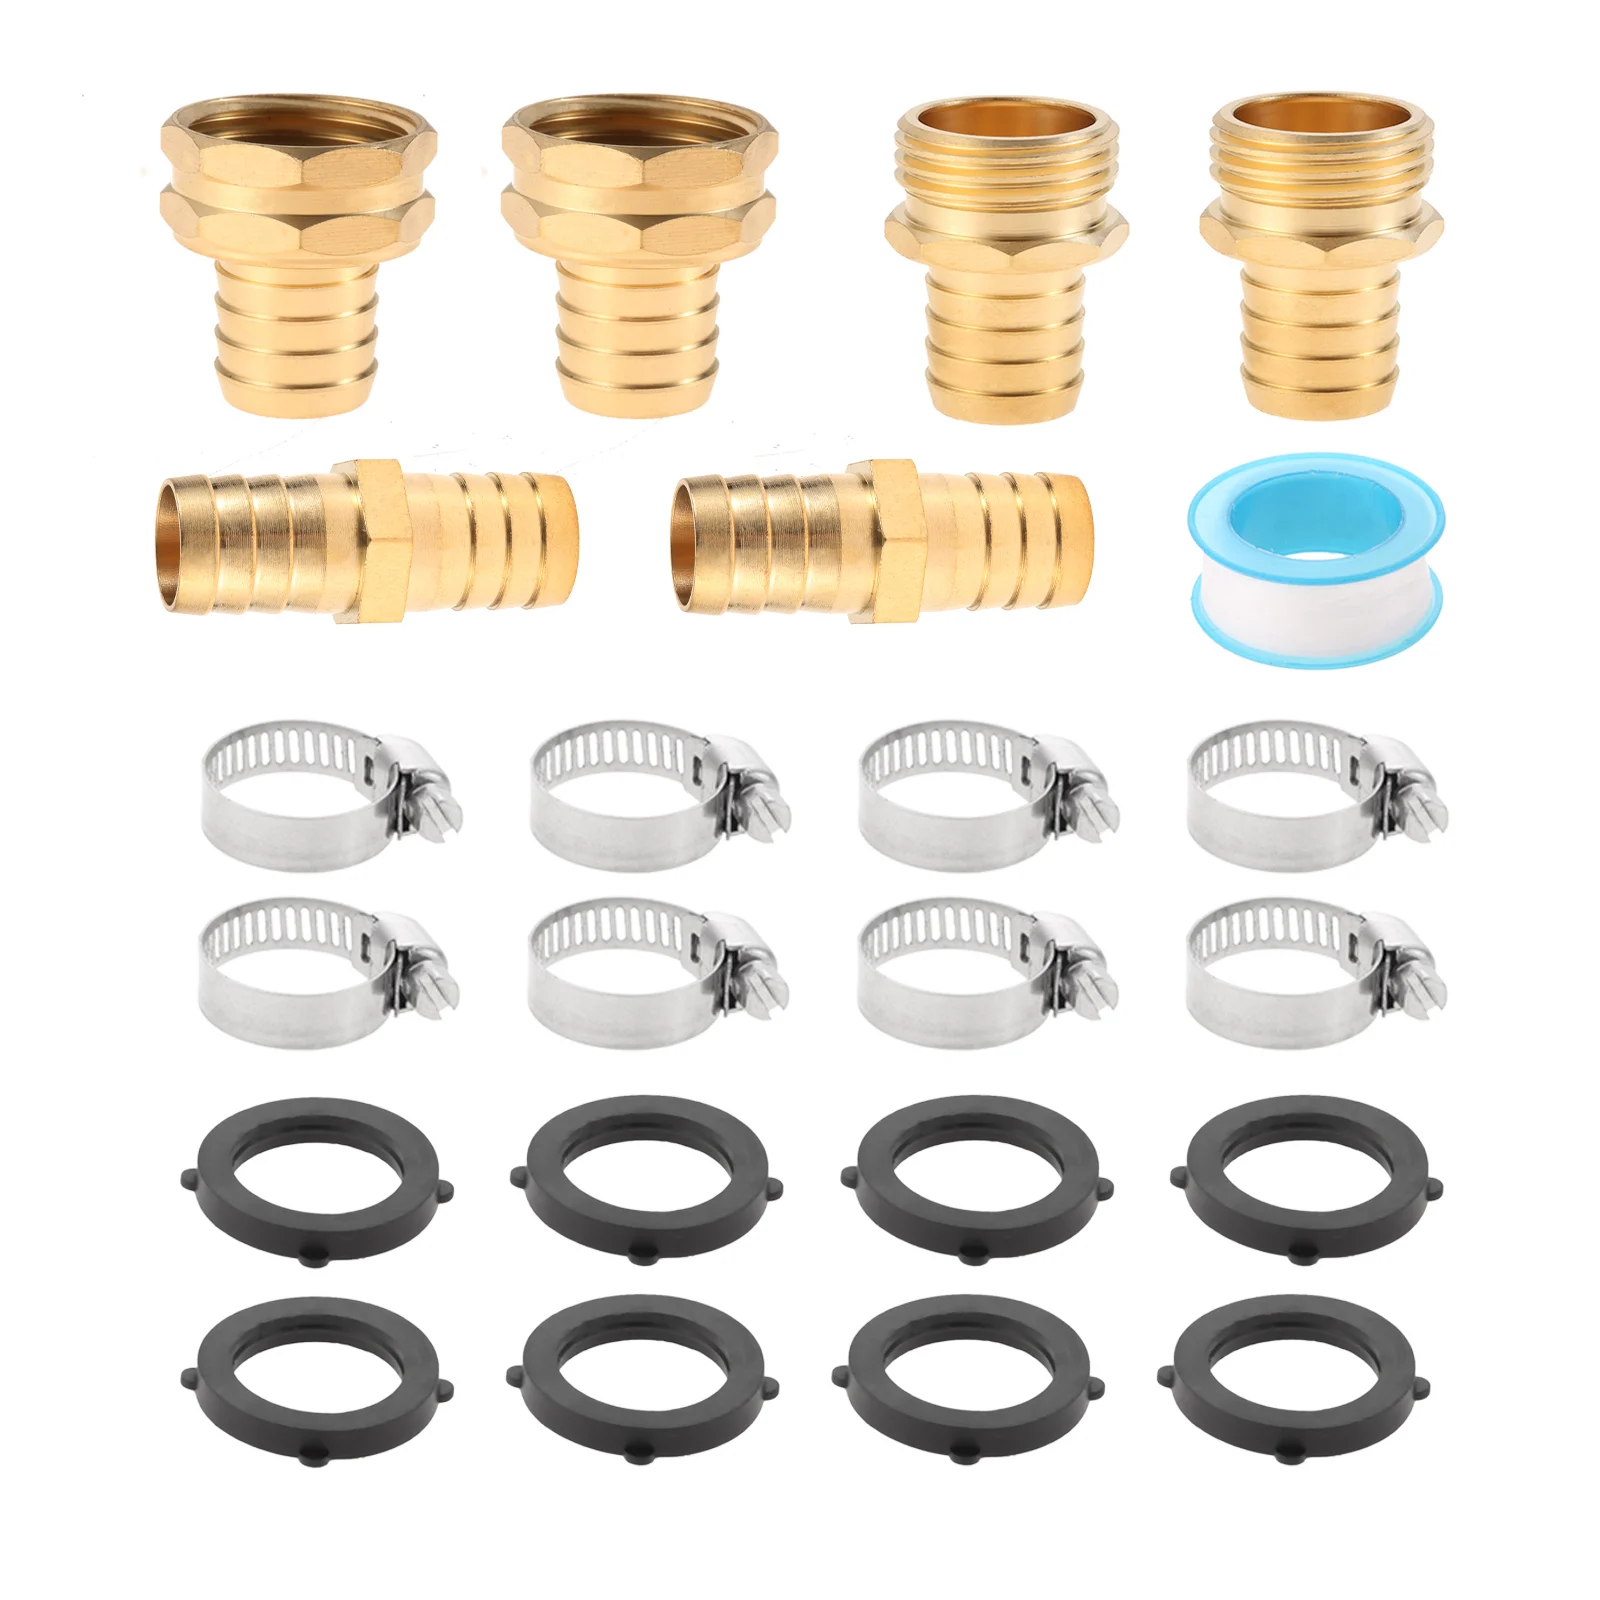 

4kits Solid Brass Garden Hose Connector Mender 3/4 5/8 1/2 Inch Water Hose Repair Female & Male Tape Steel Clamp Rubber Gasket